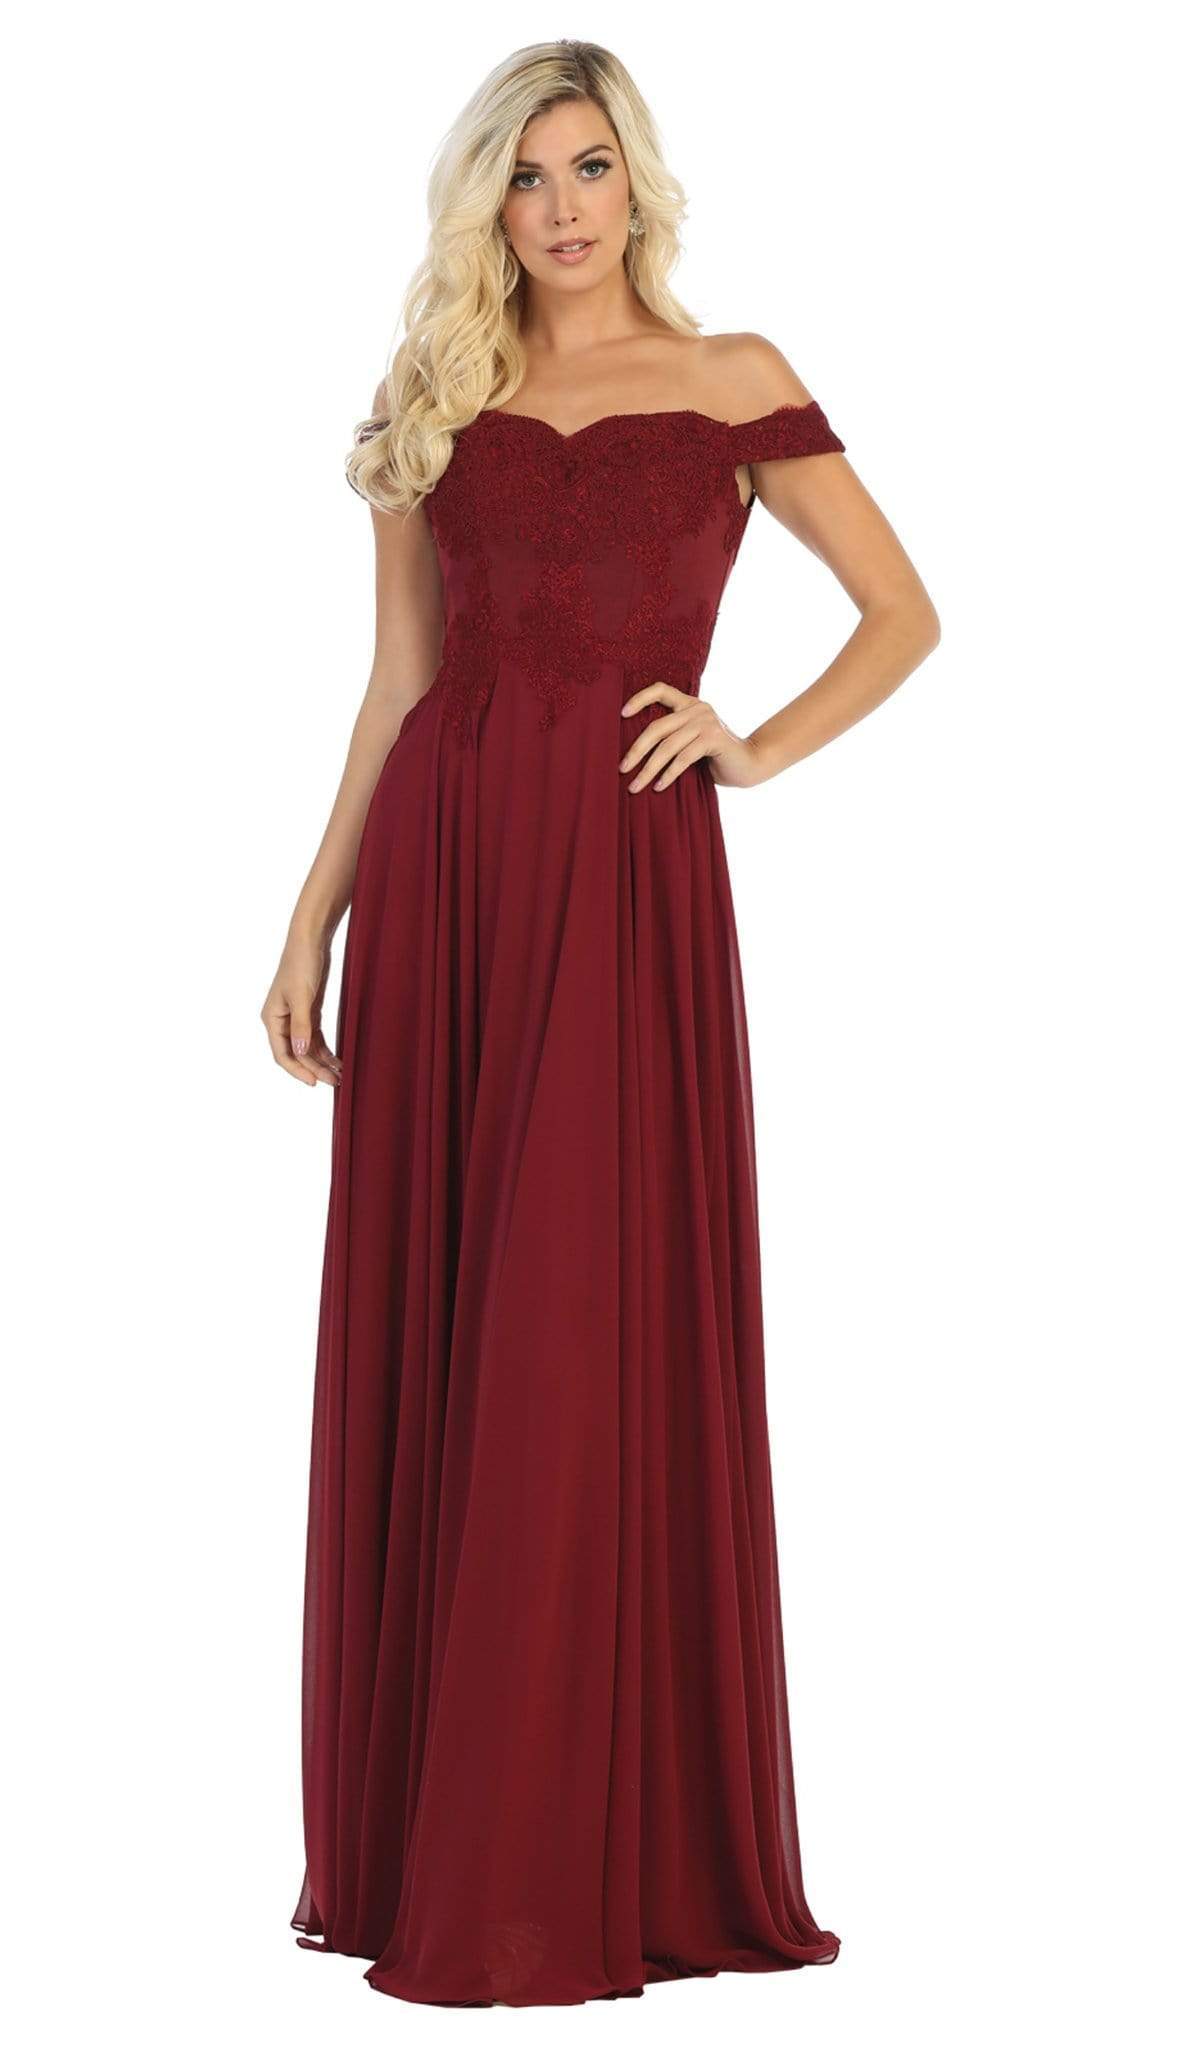 May Queen - MQ1644B Embroidered Off-Shoulder A-Line Dress